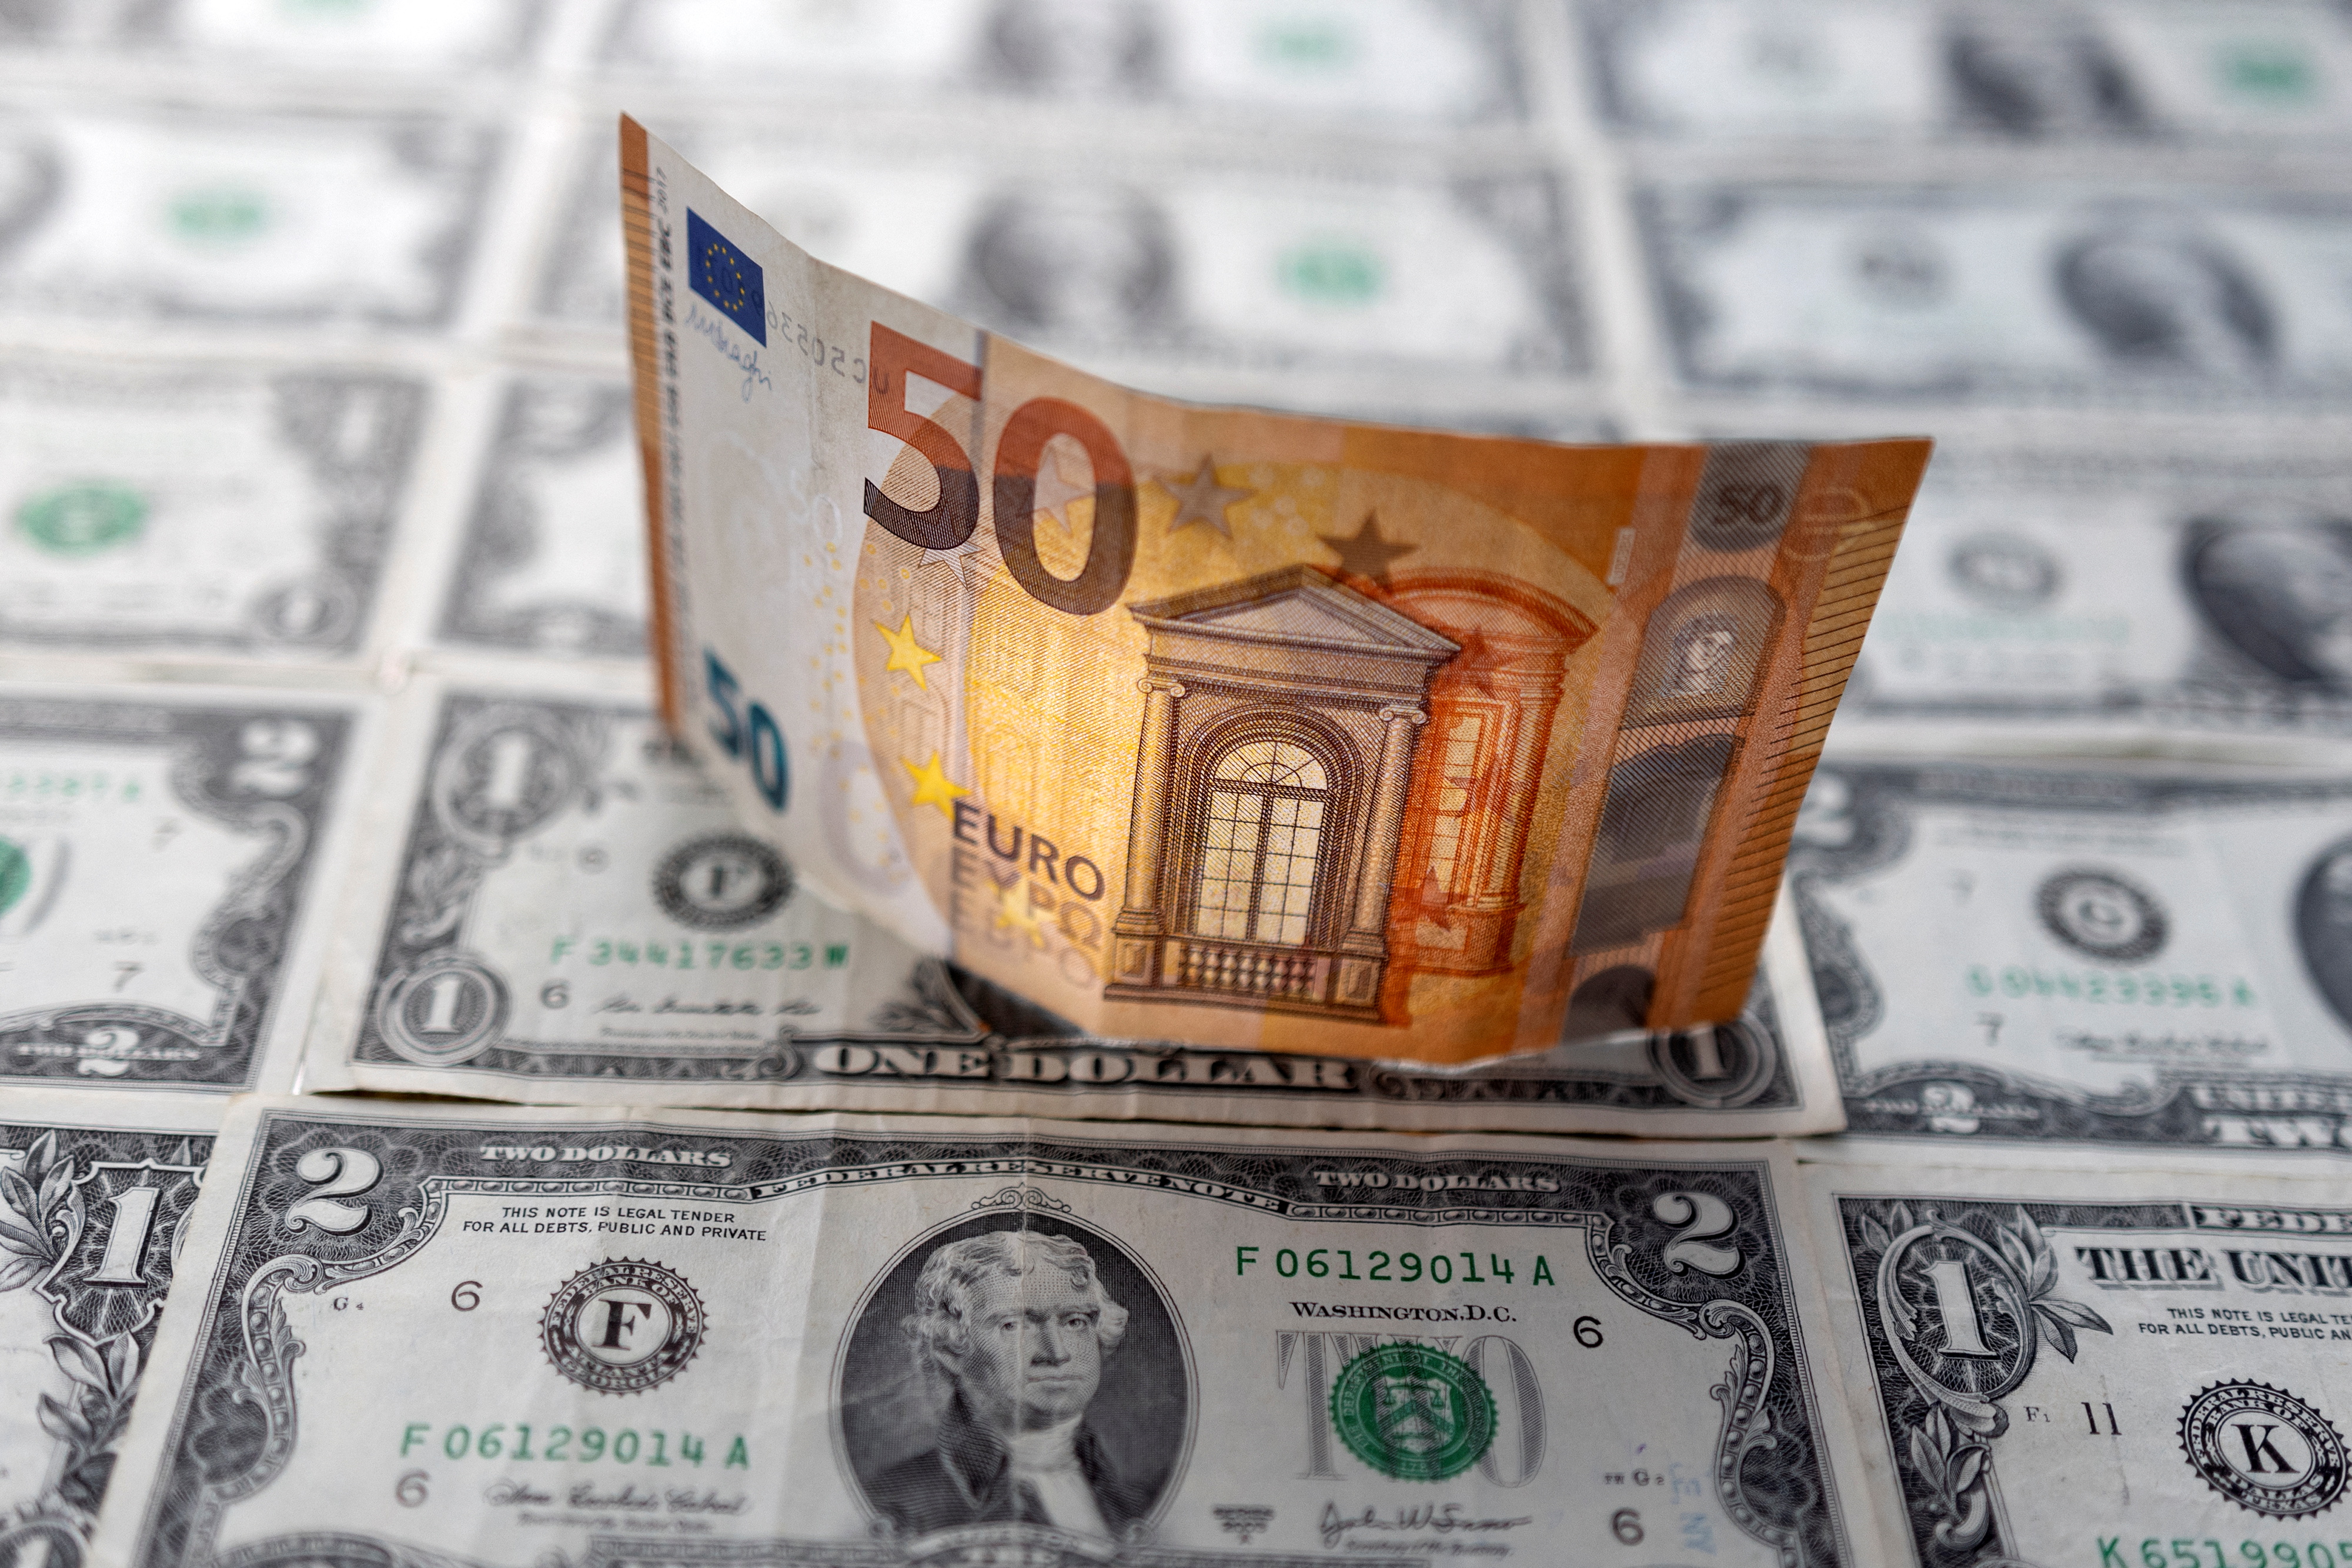  Euro banknote placed on U.S. Dollar banknotes